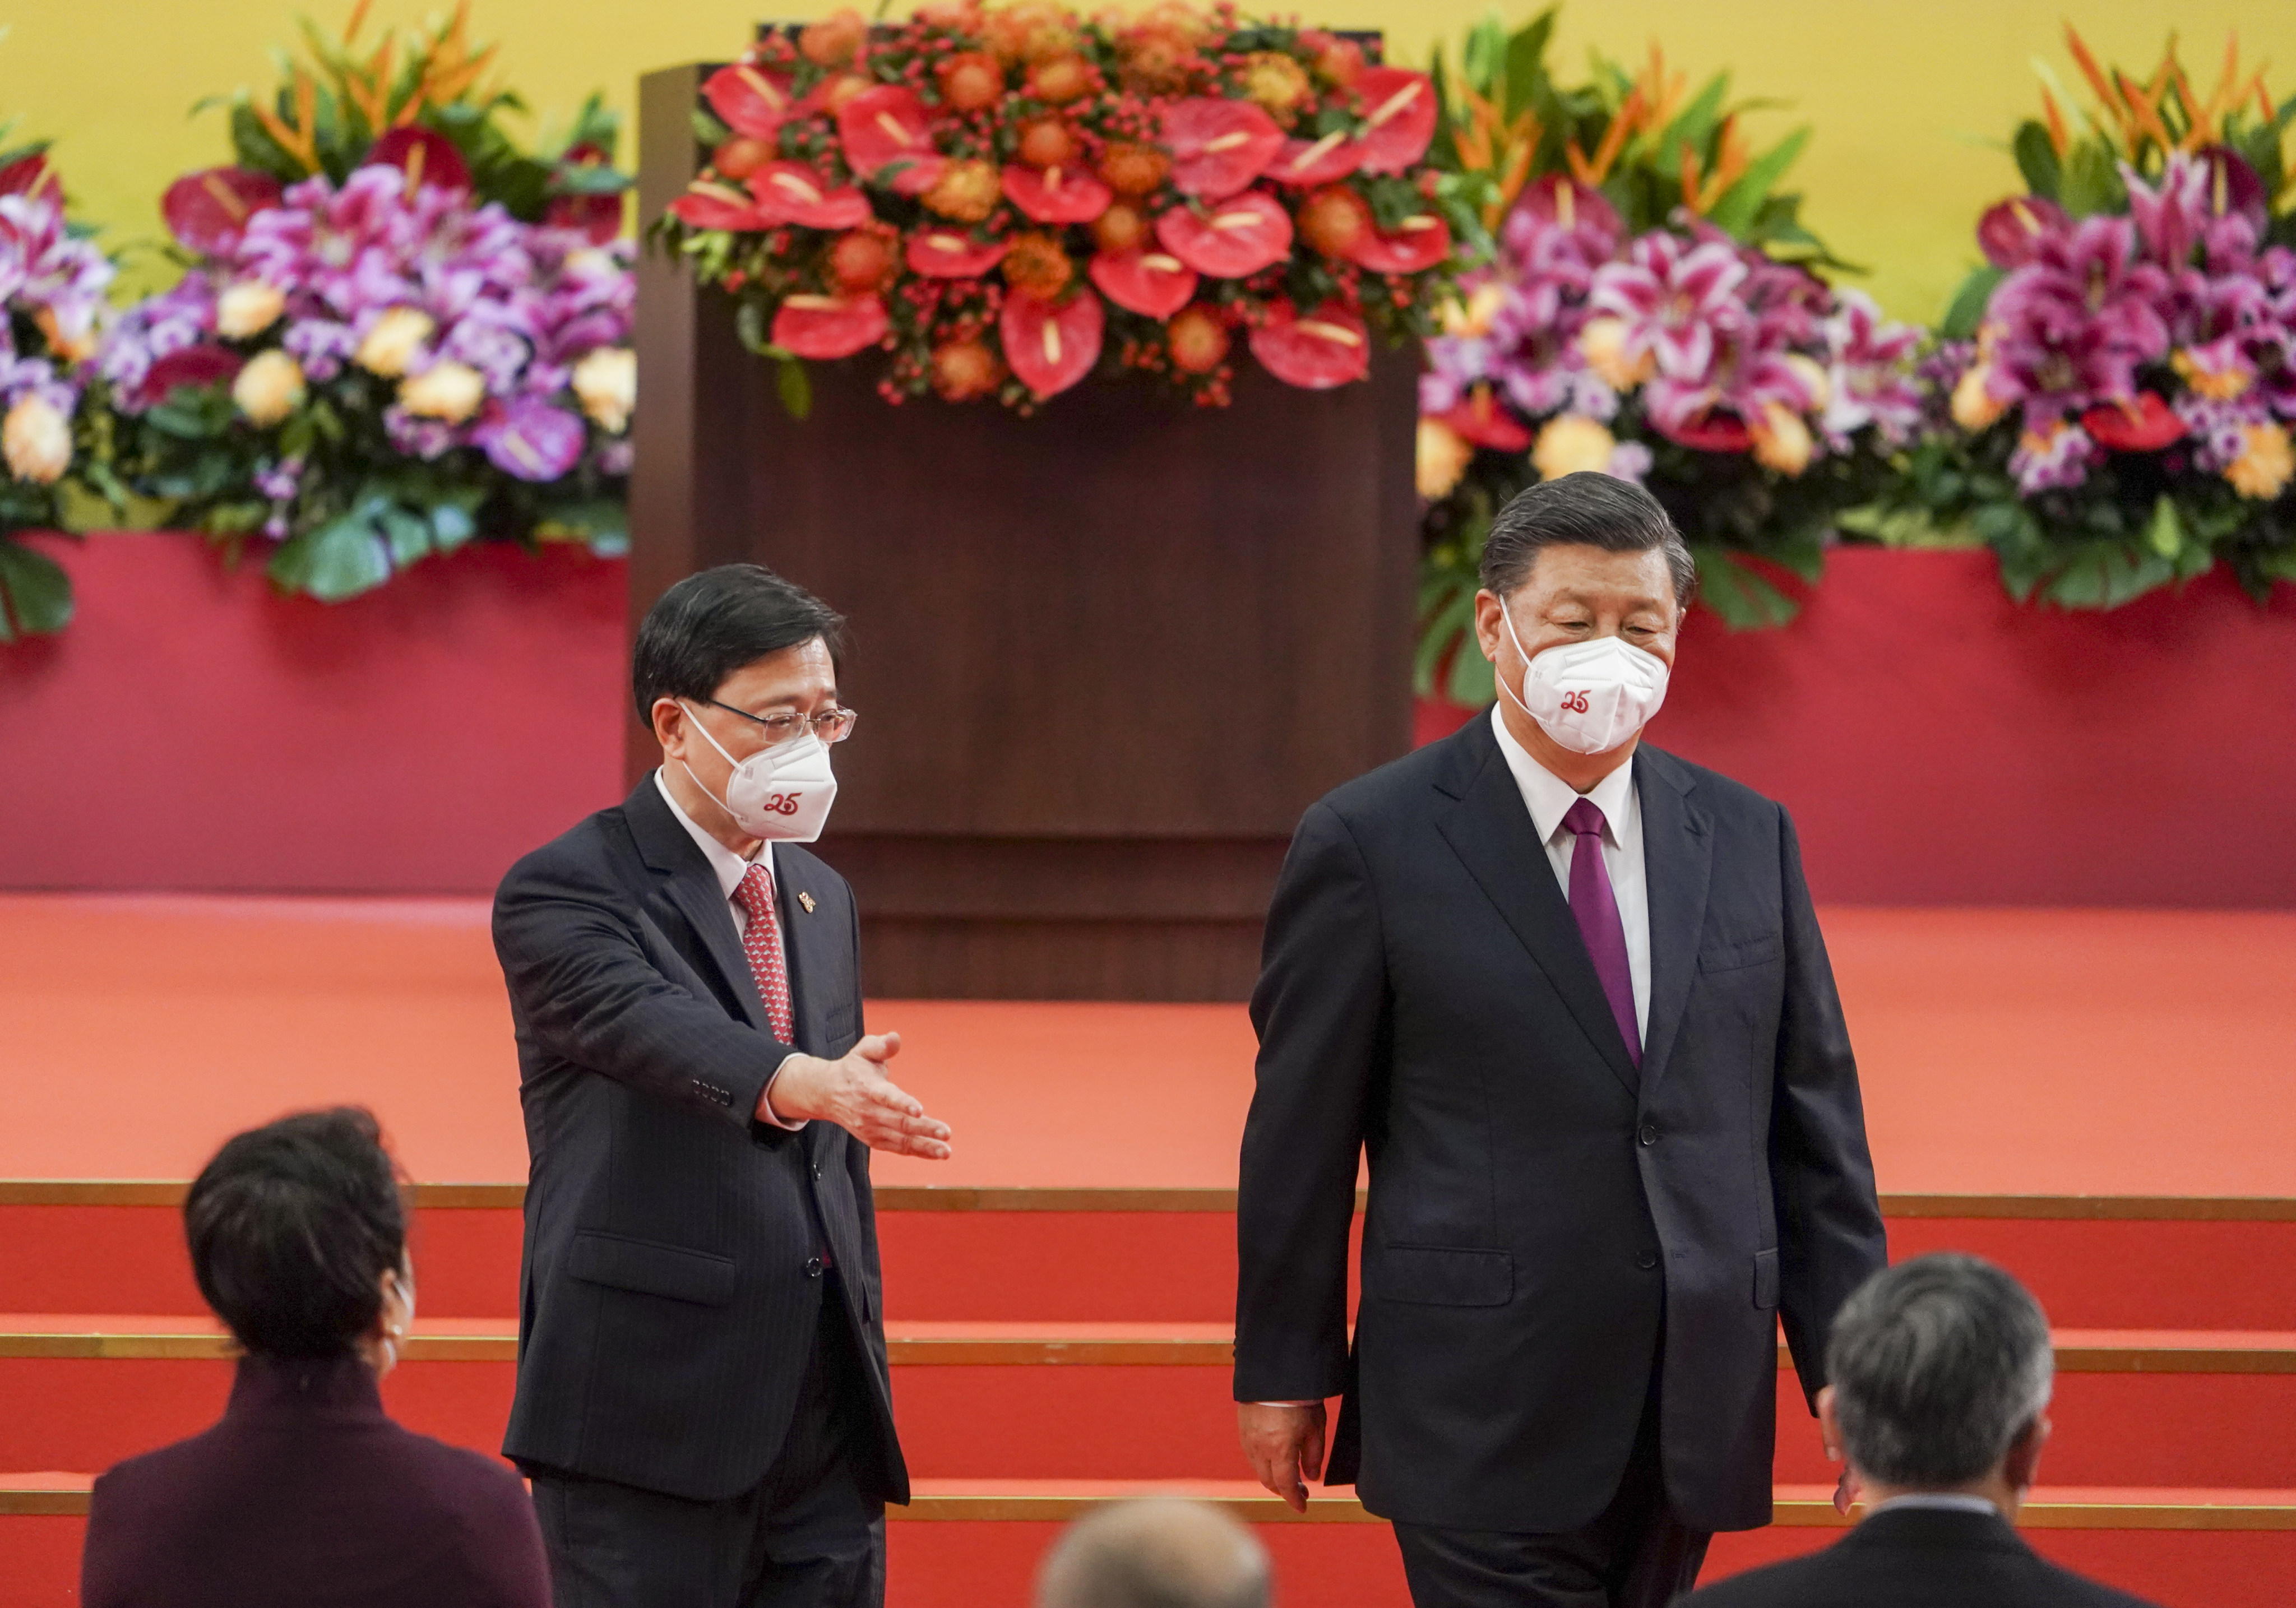 New city leader John Lee (left) with President Xi Jinping on July 1 at the swearing-in of Lee’s team. Photo: Felix Wong 

